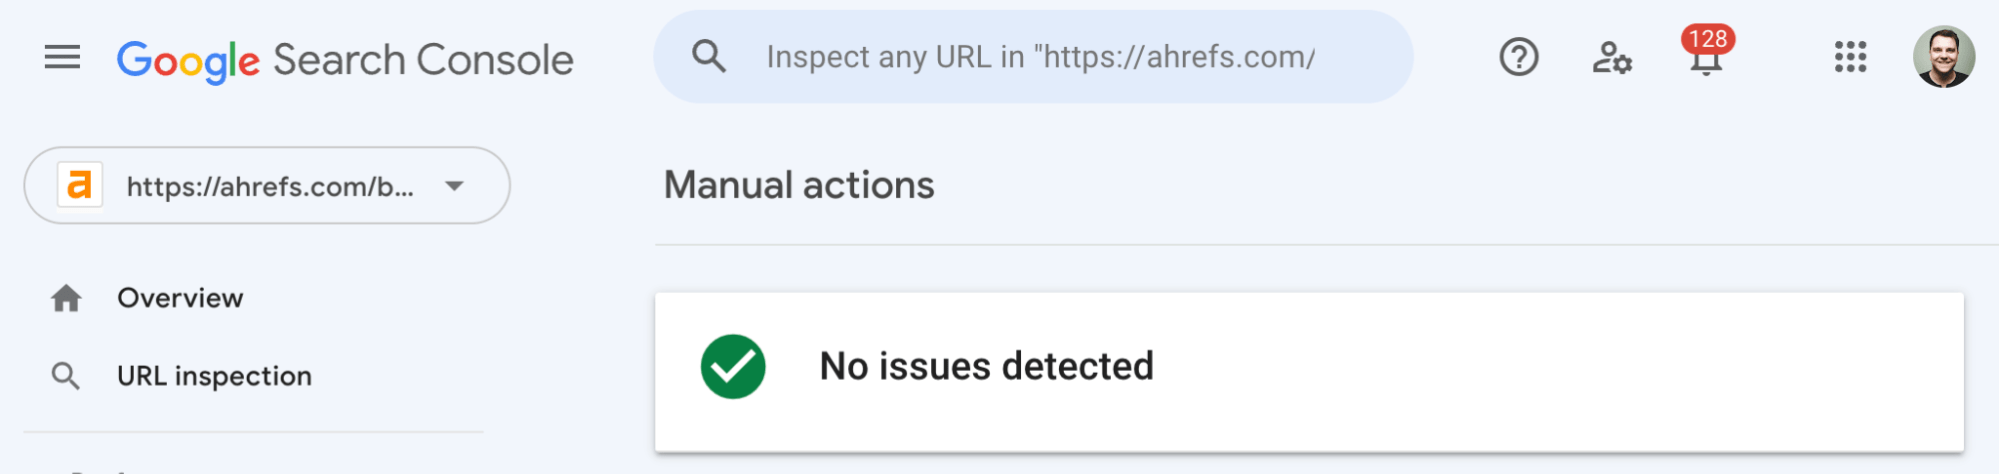 Manual actions report in Google Search Console
